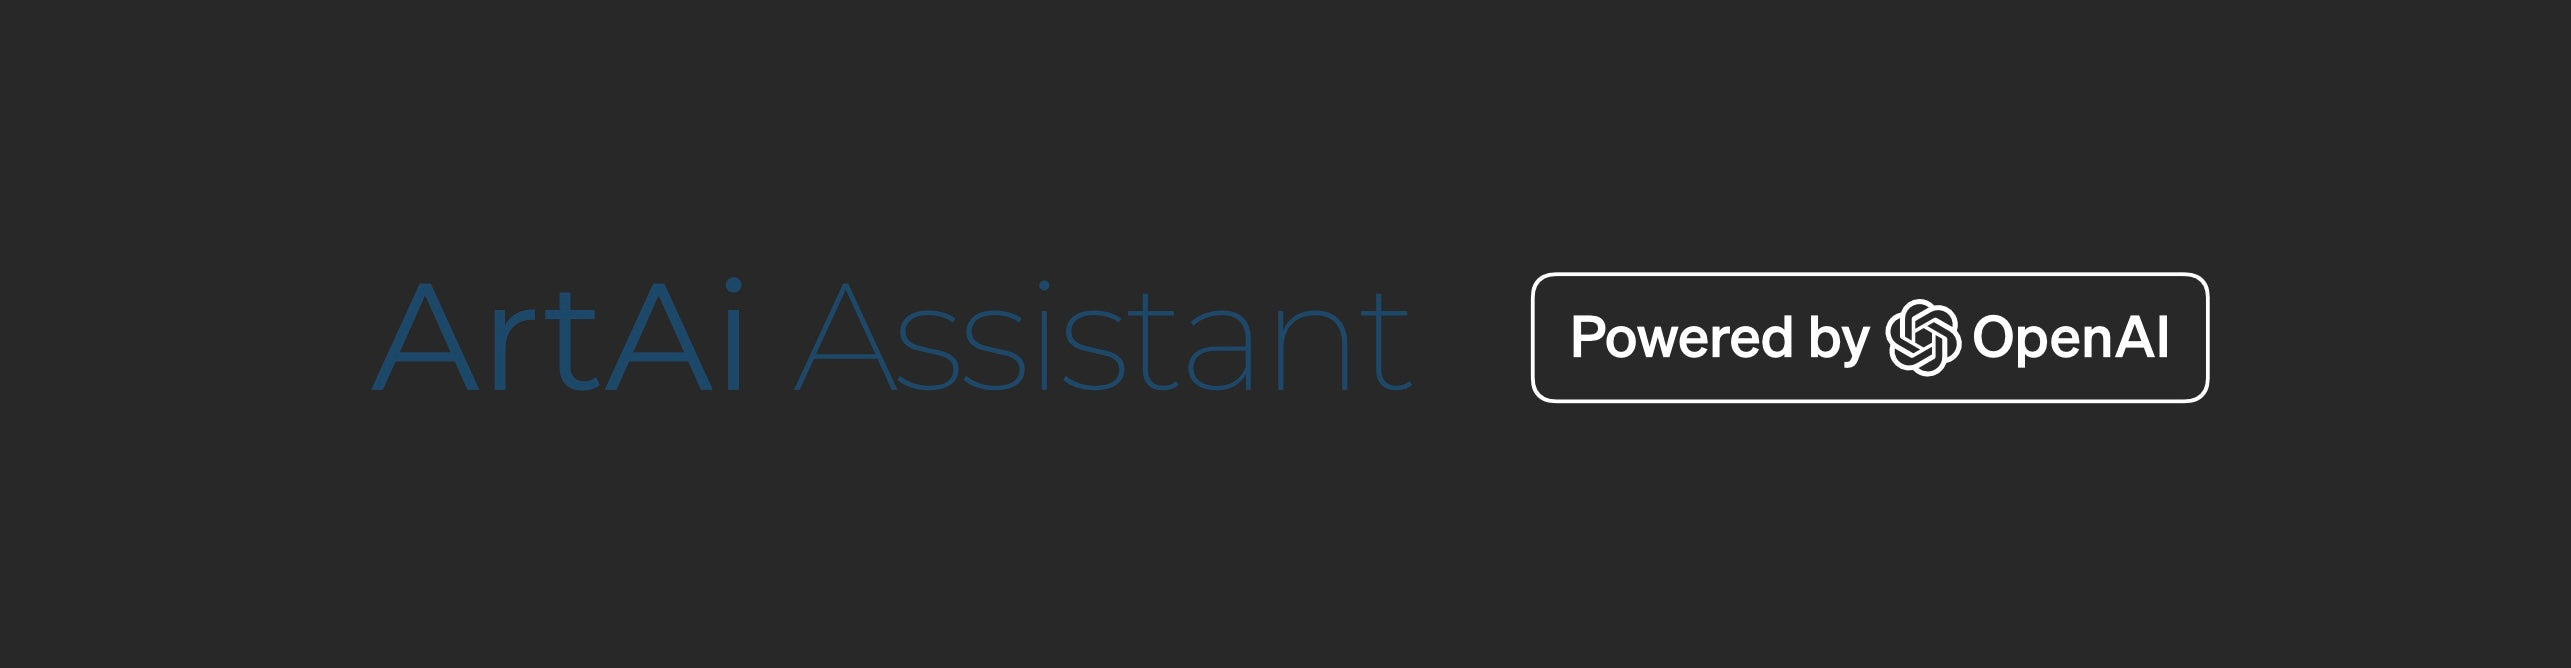 ArtAi Assistant. Powered by Open AI.